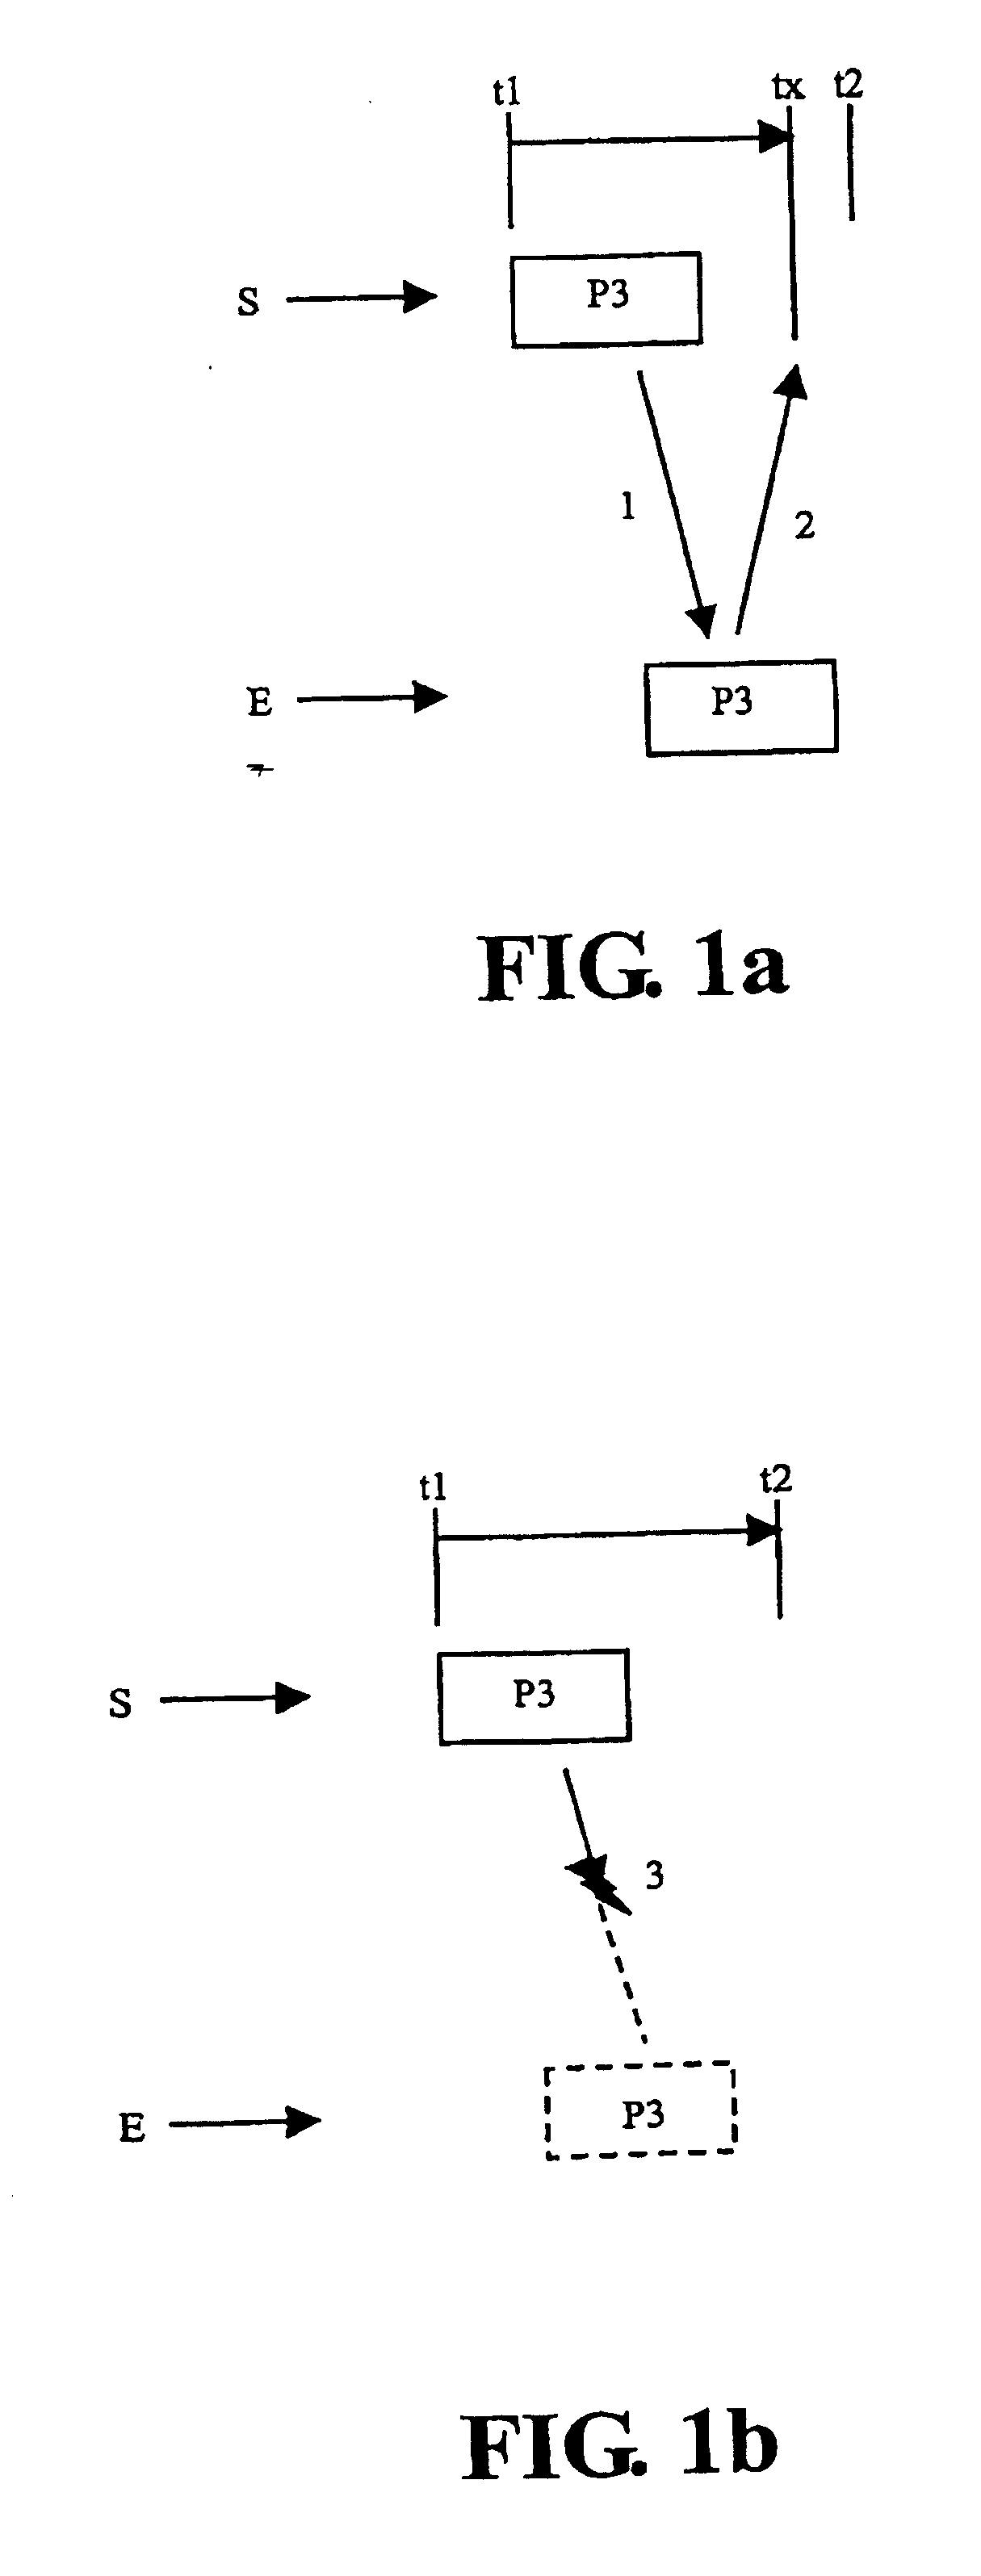 Method and system for transmitting data packets